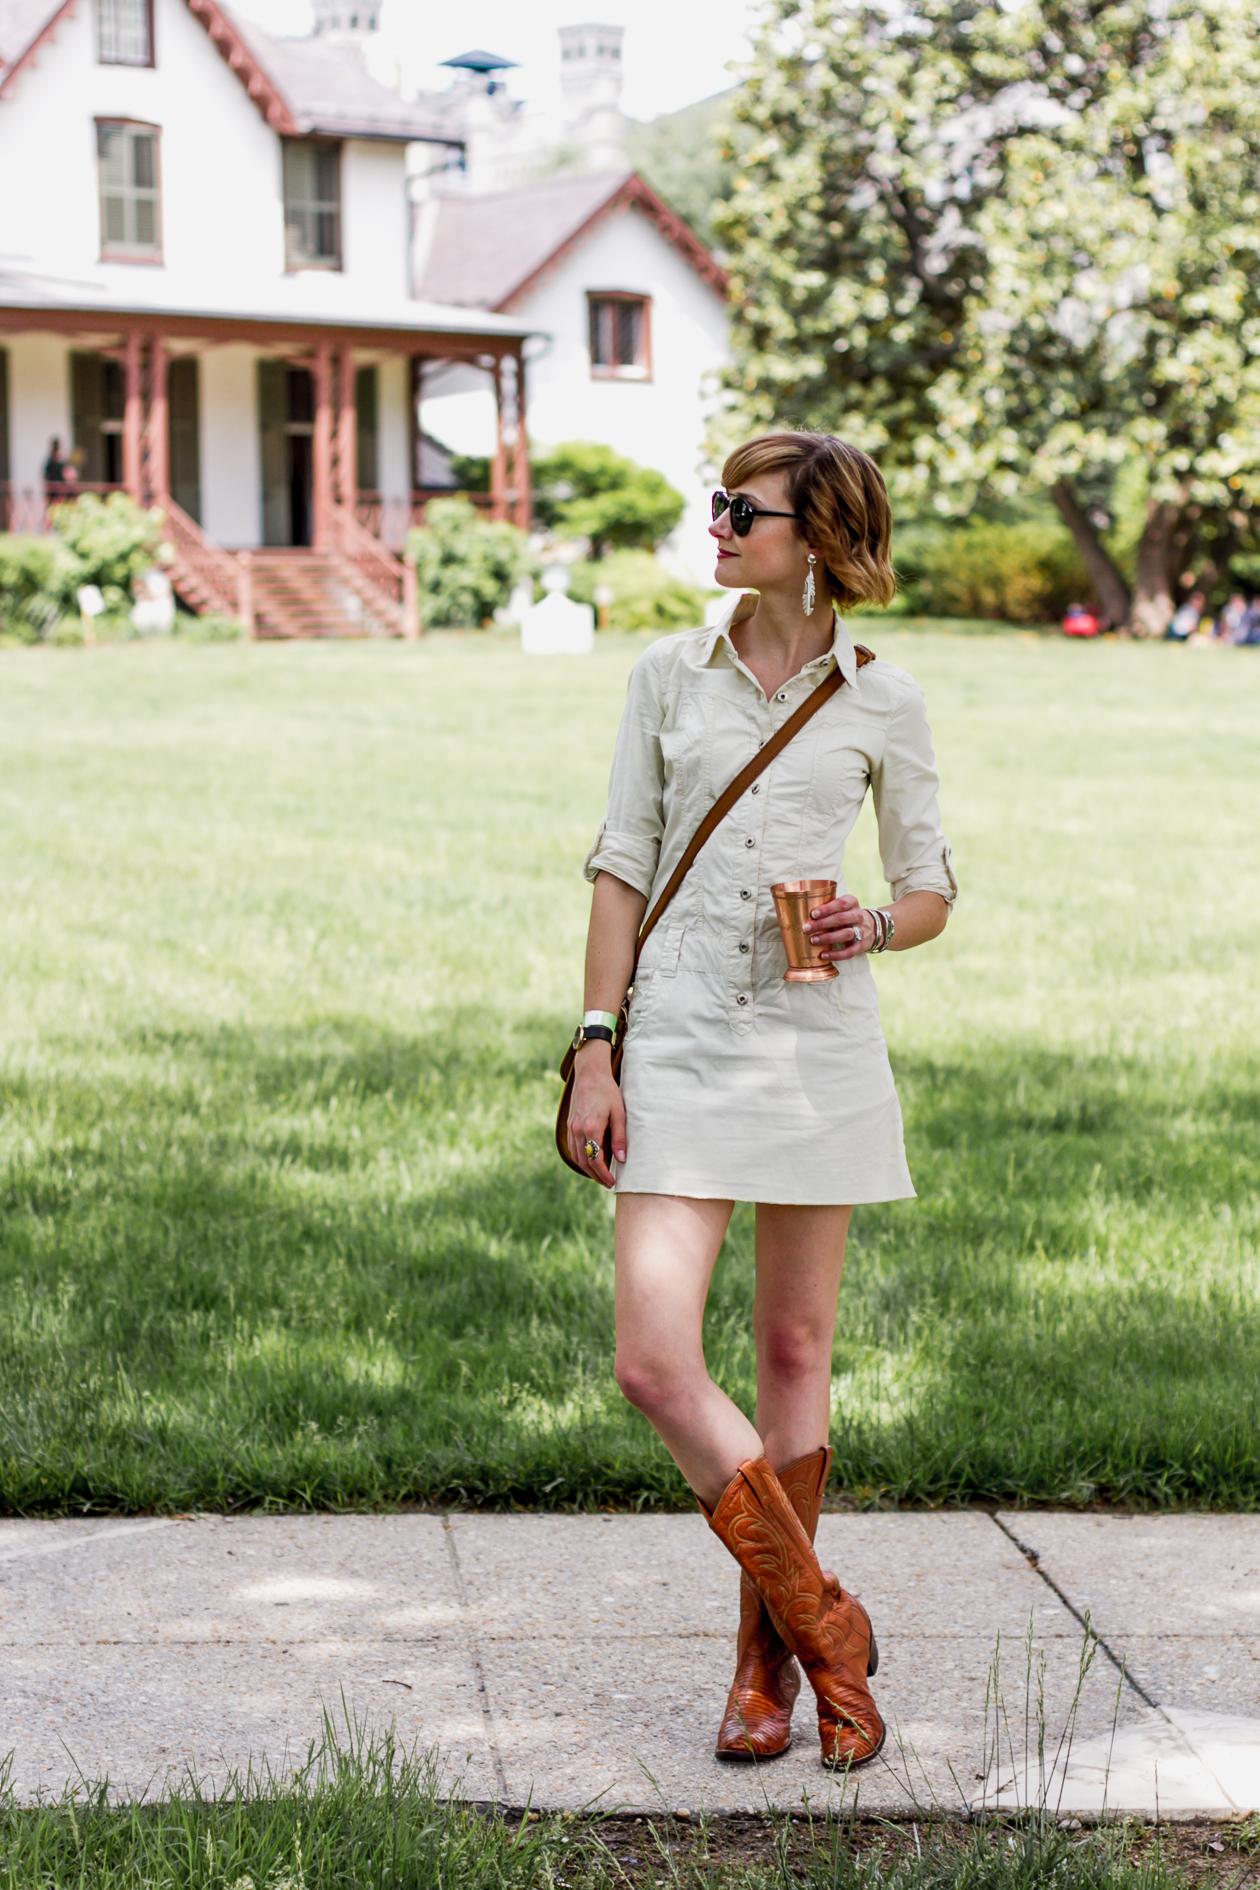 Joie mini dress and western boots